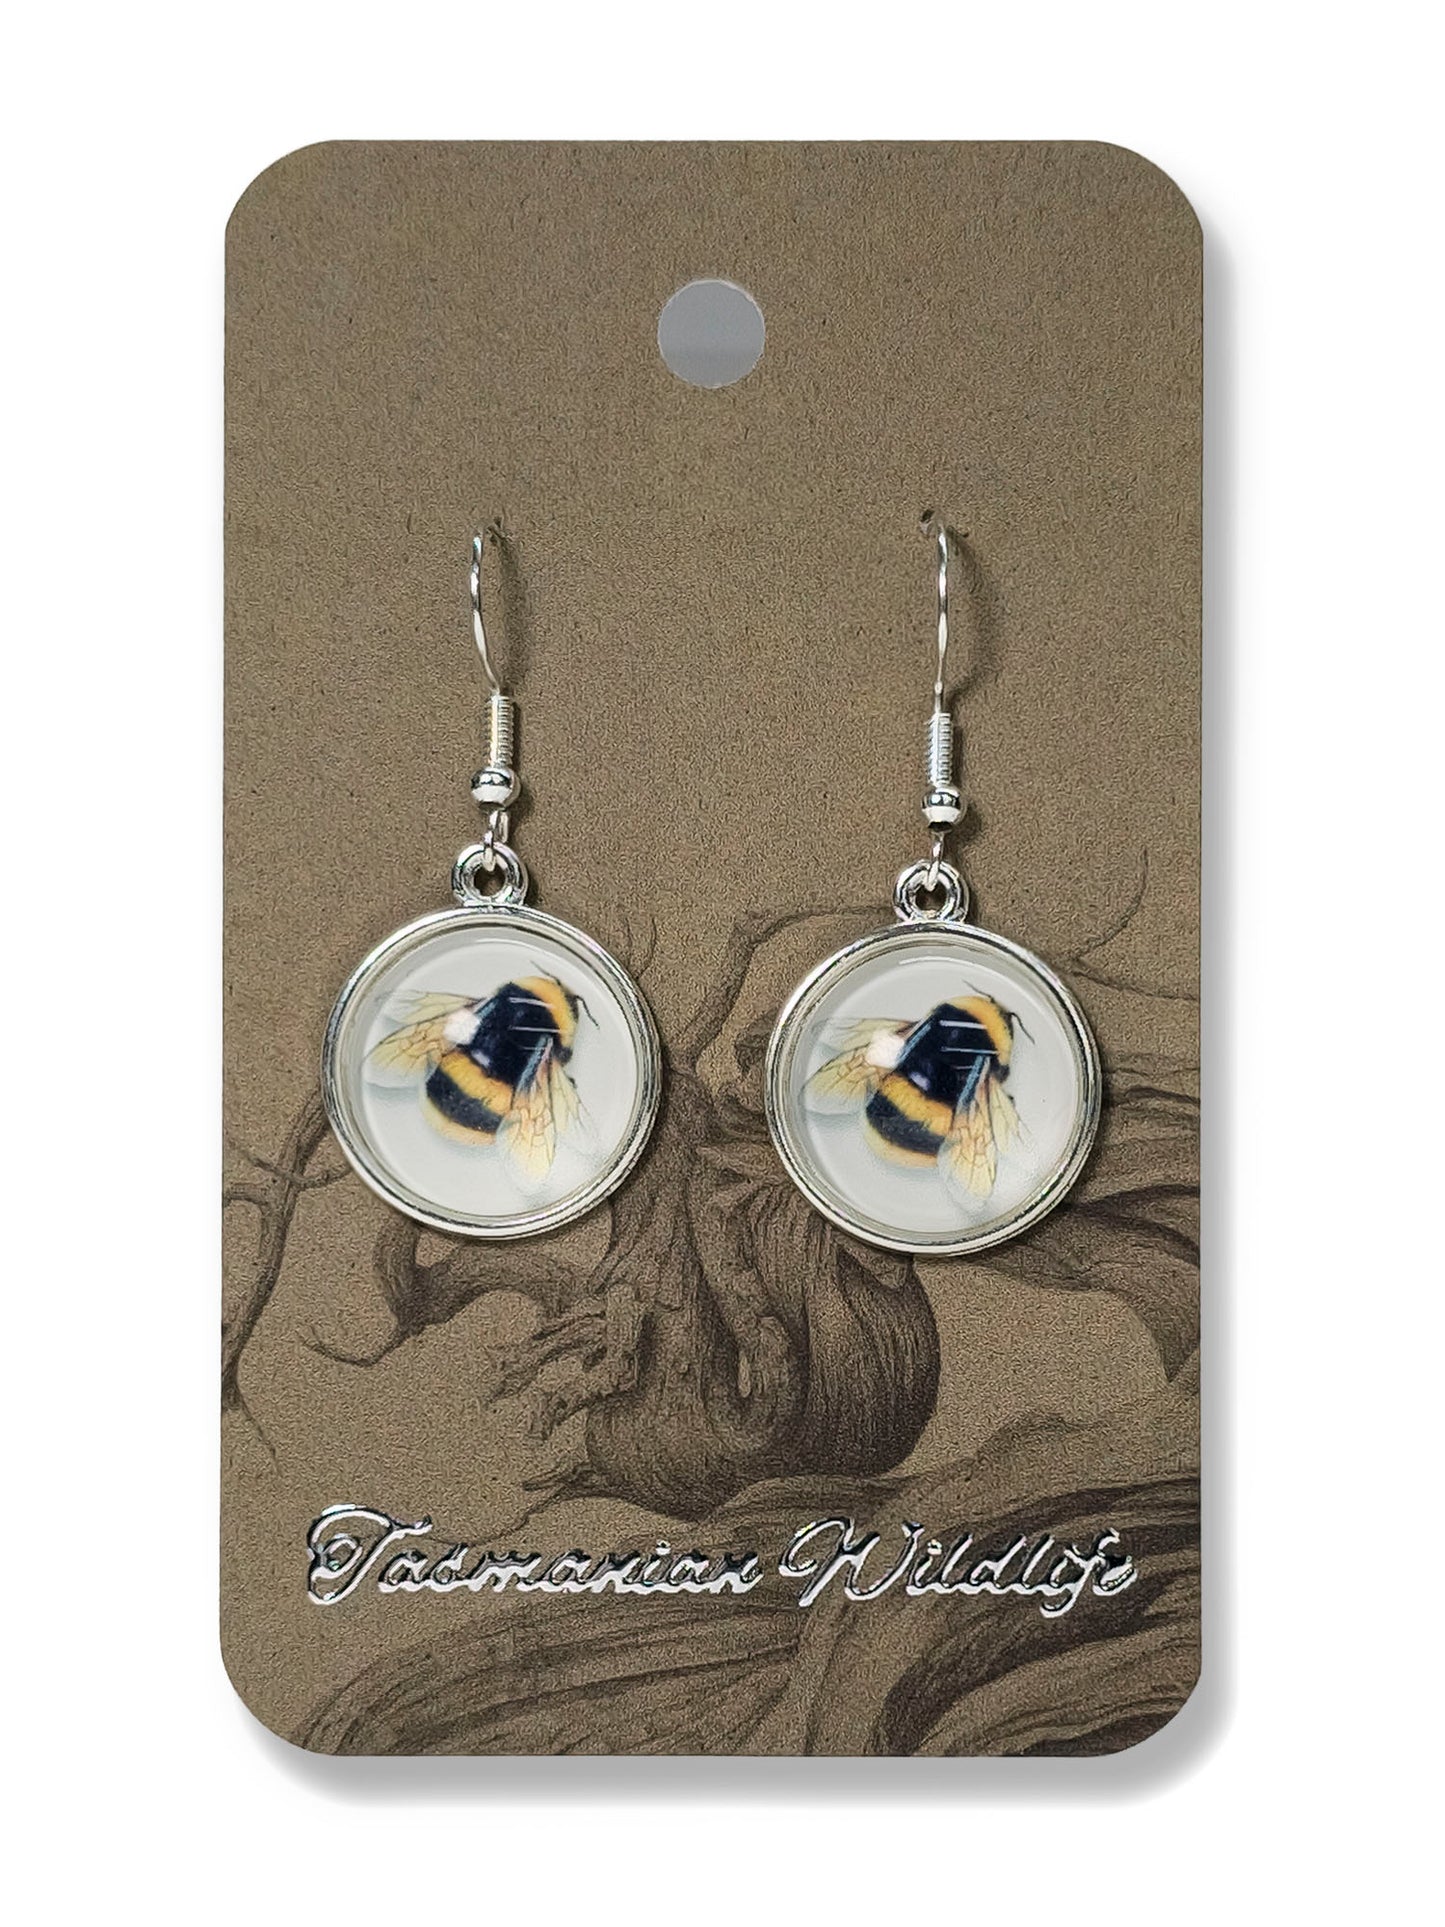 Bumble Bee glass cabochon earrings